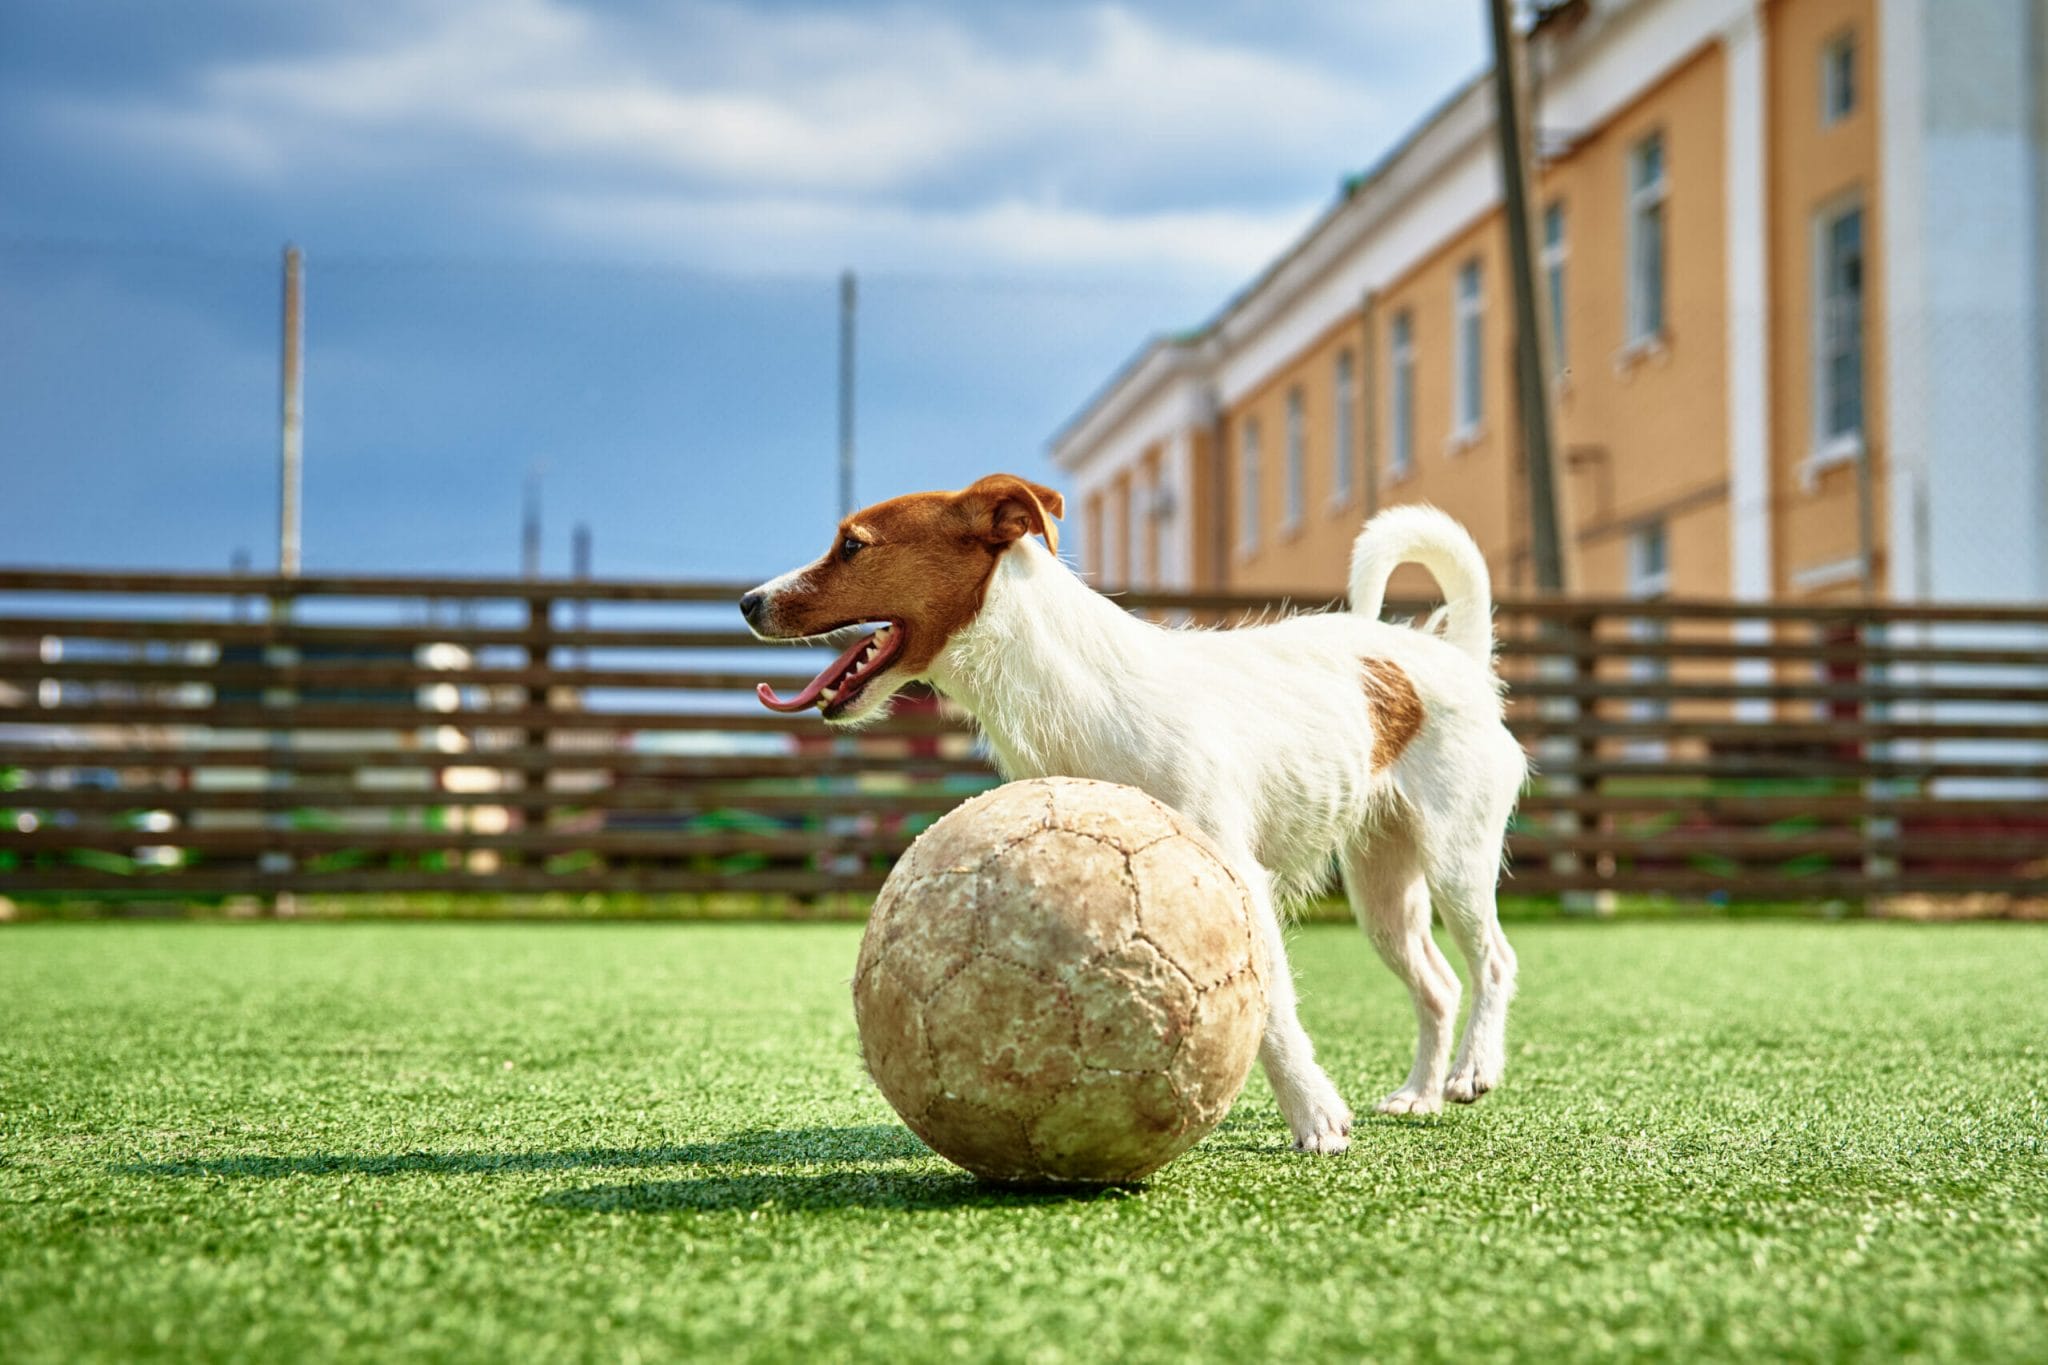 What is important to consider with infill for dogs?